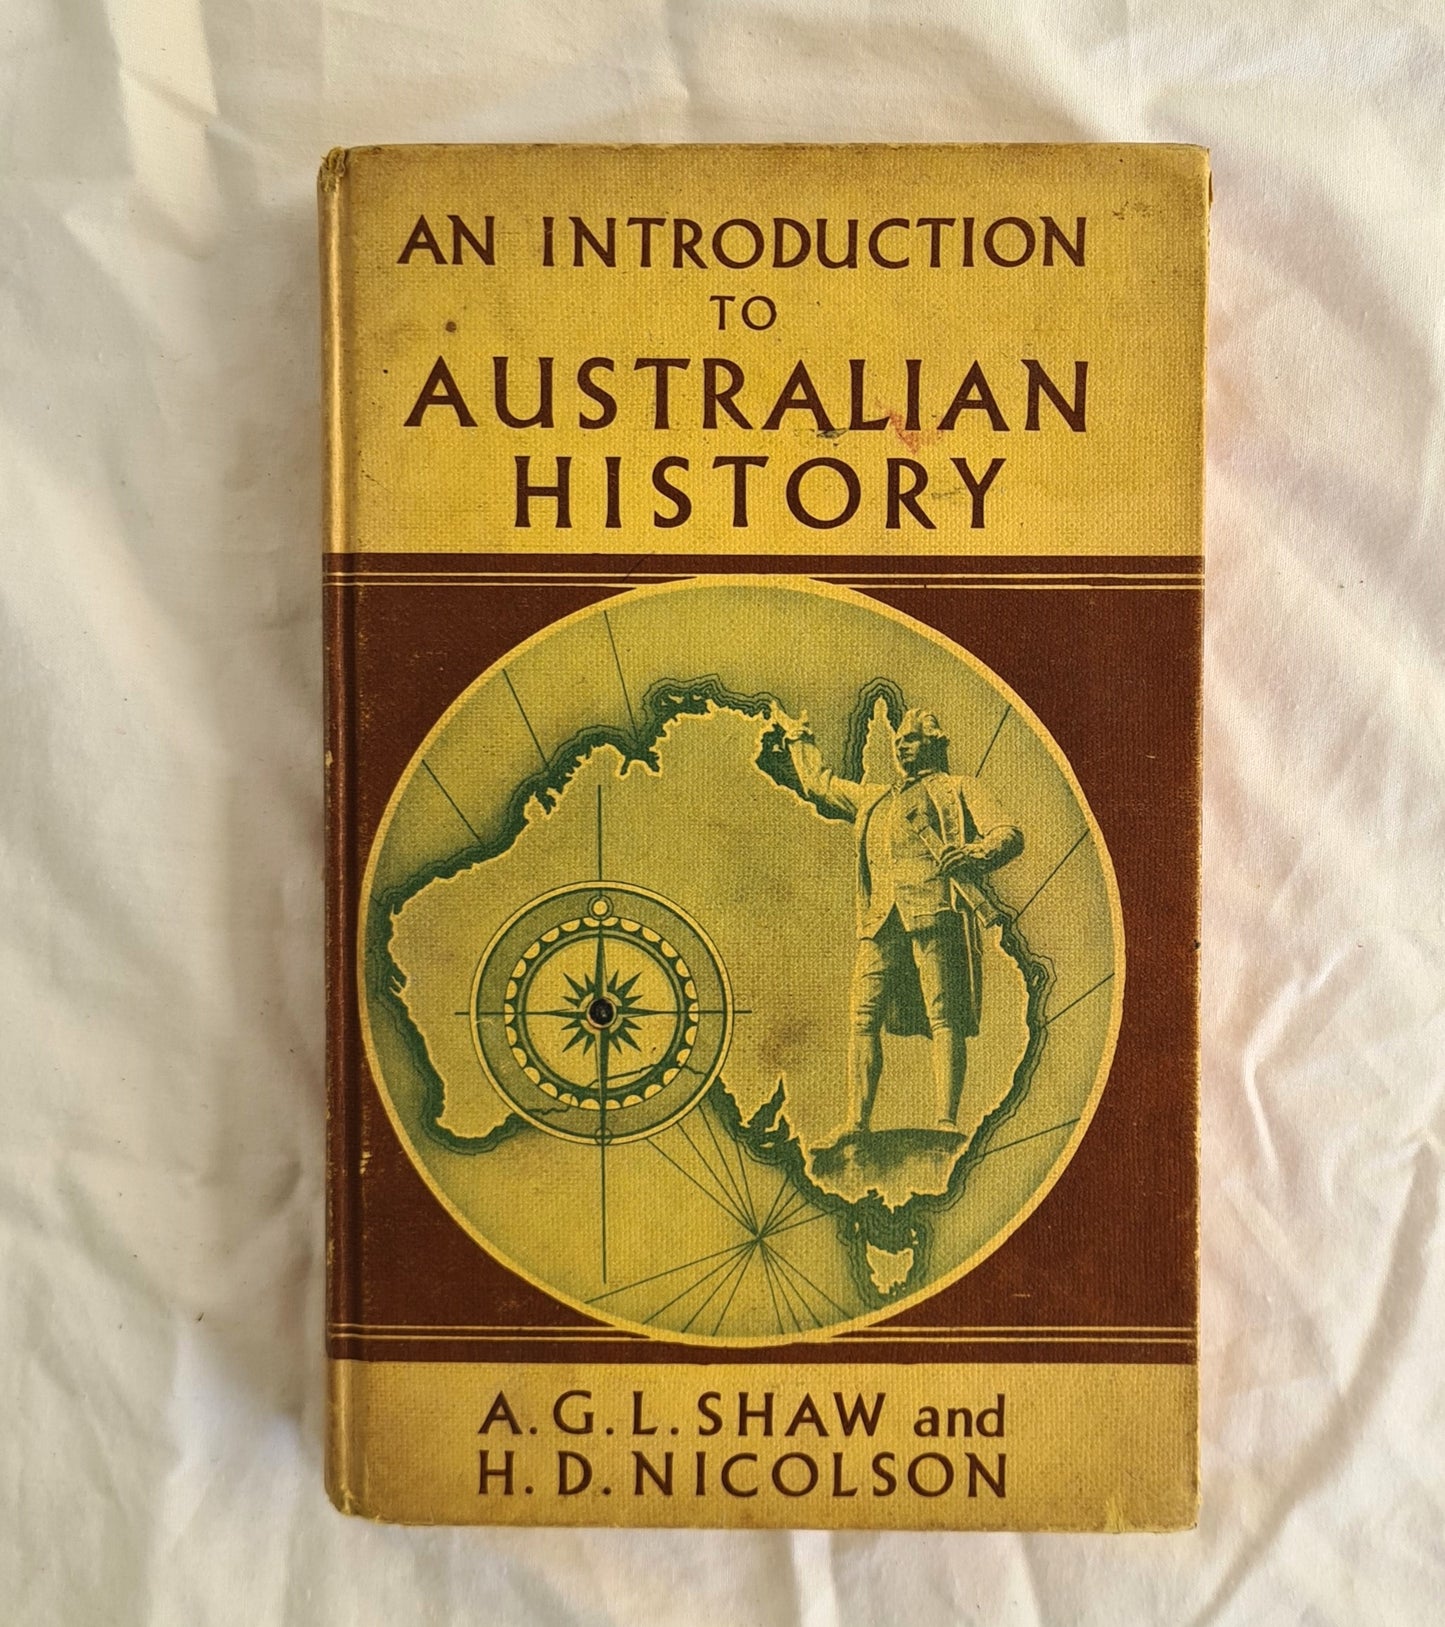 An Introduction to Australian History  by A. G. L. Shaw and H. D. Nicolson